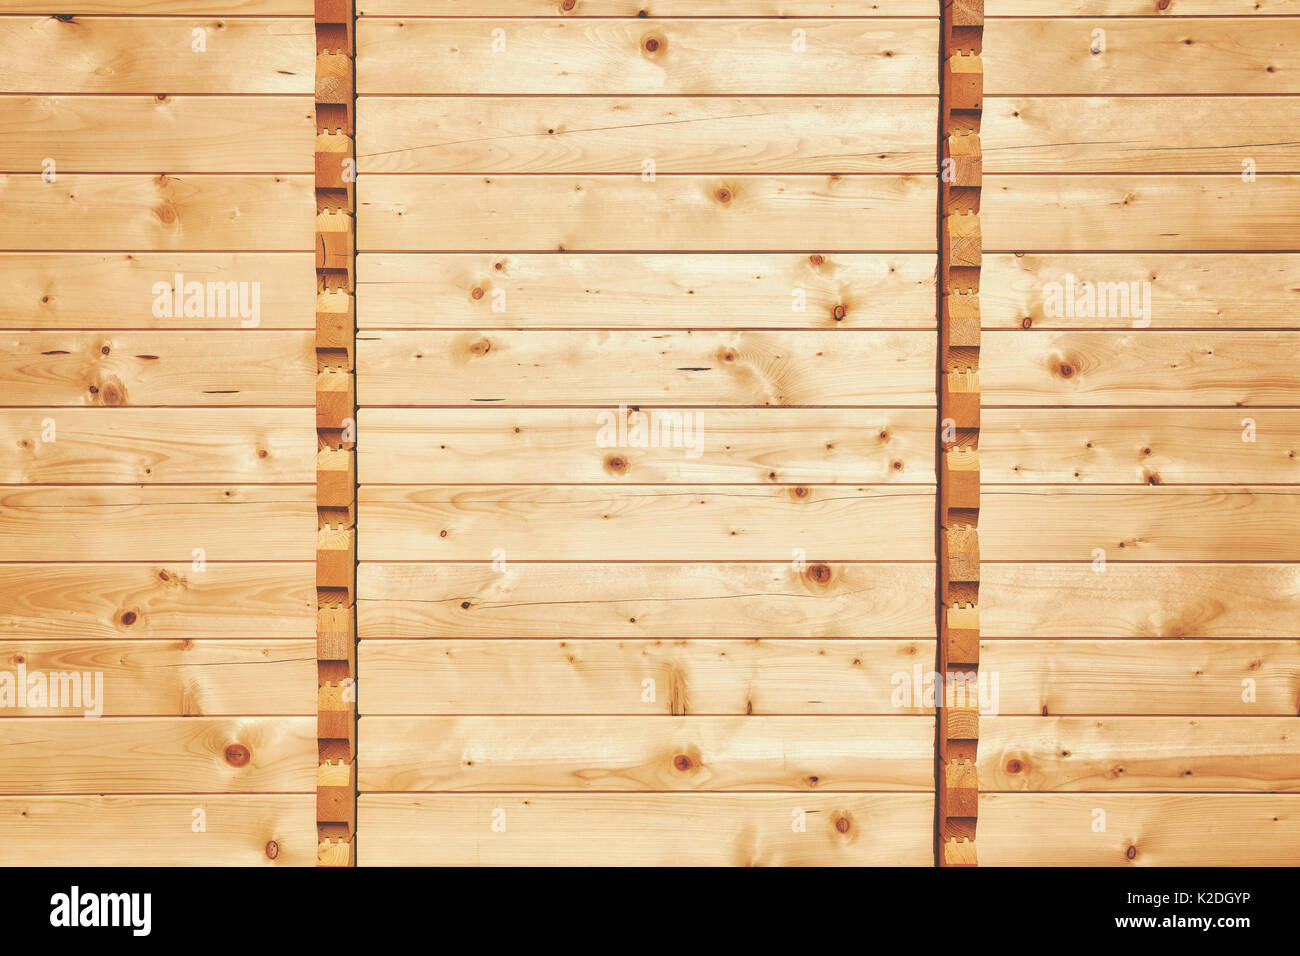 Wood plank wall background, space for text. Stock Photo